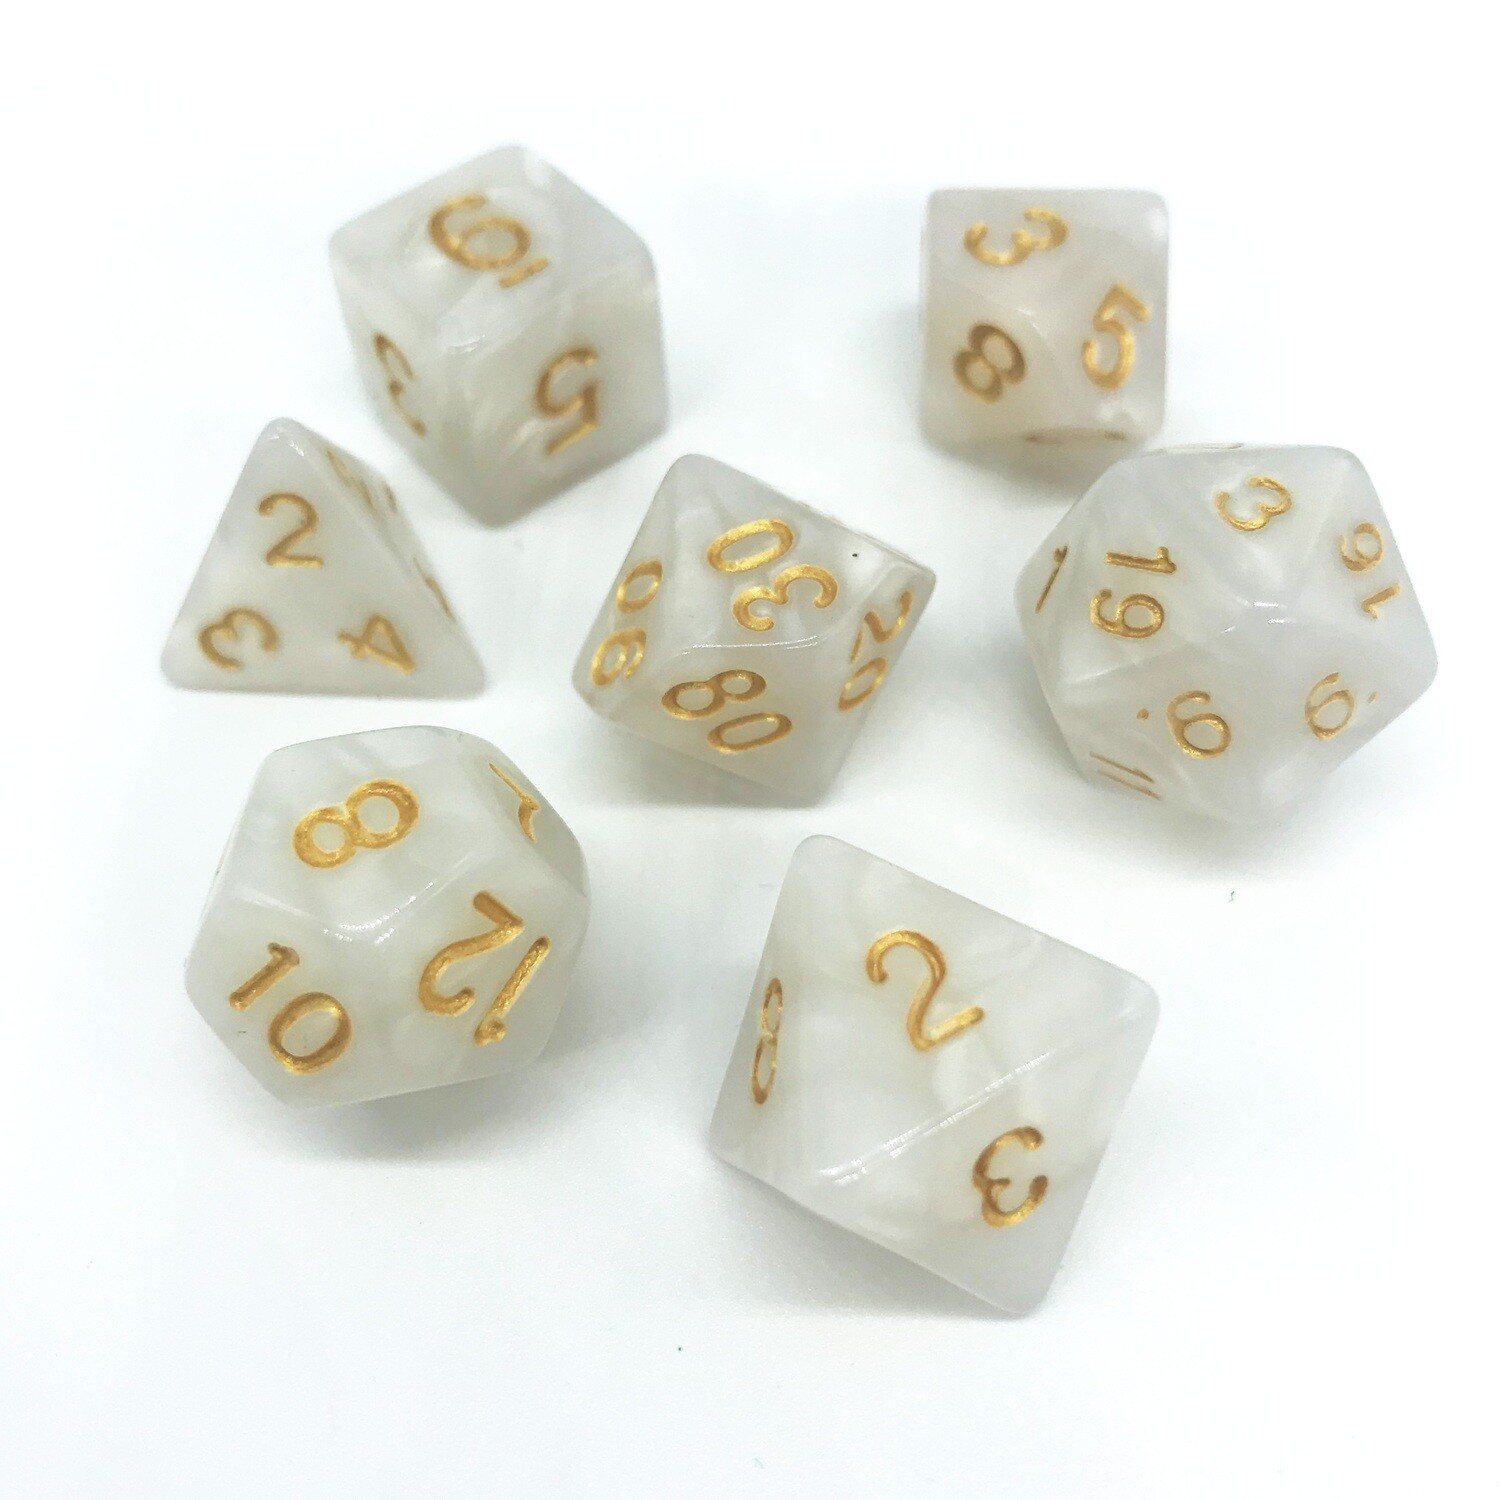 Dice Set - White marbled with gold numbers